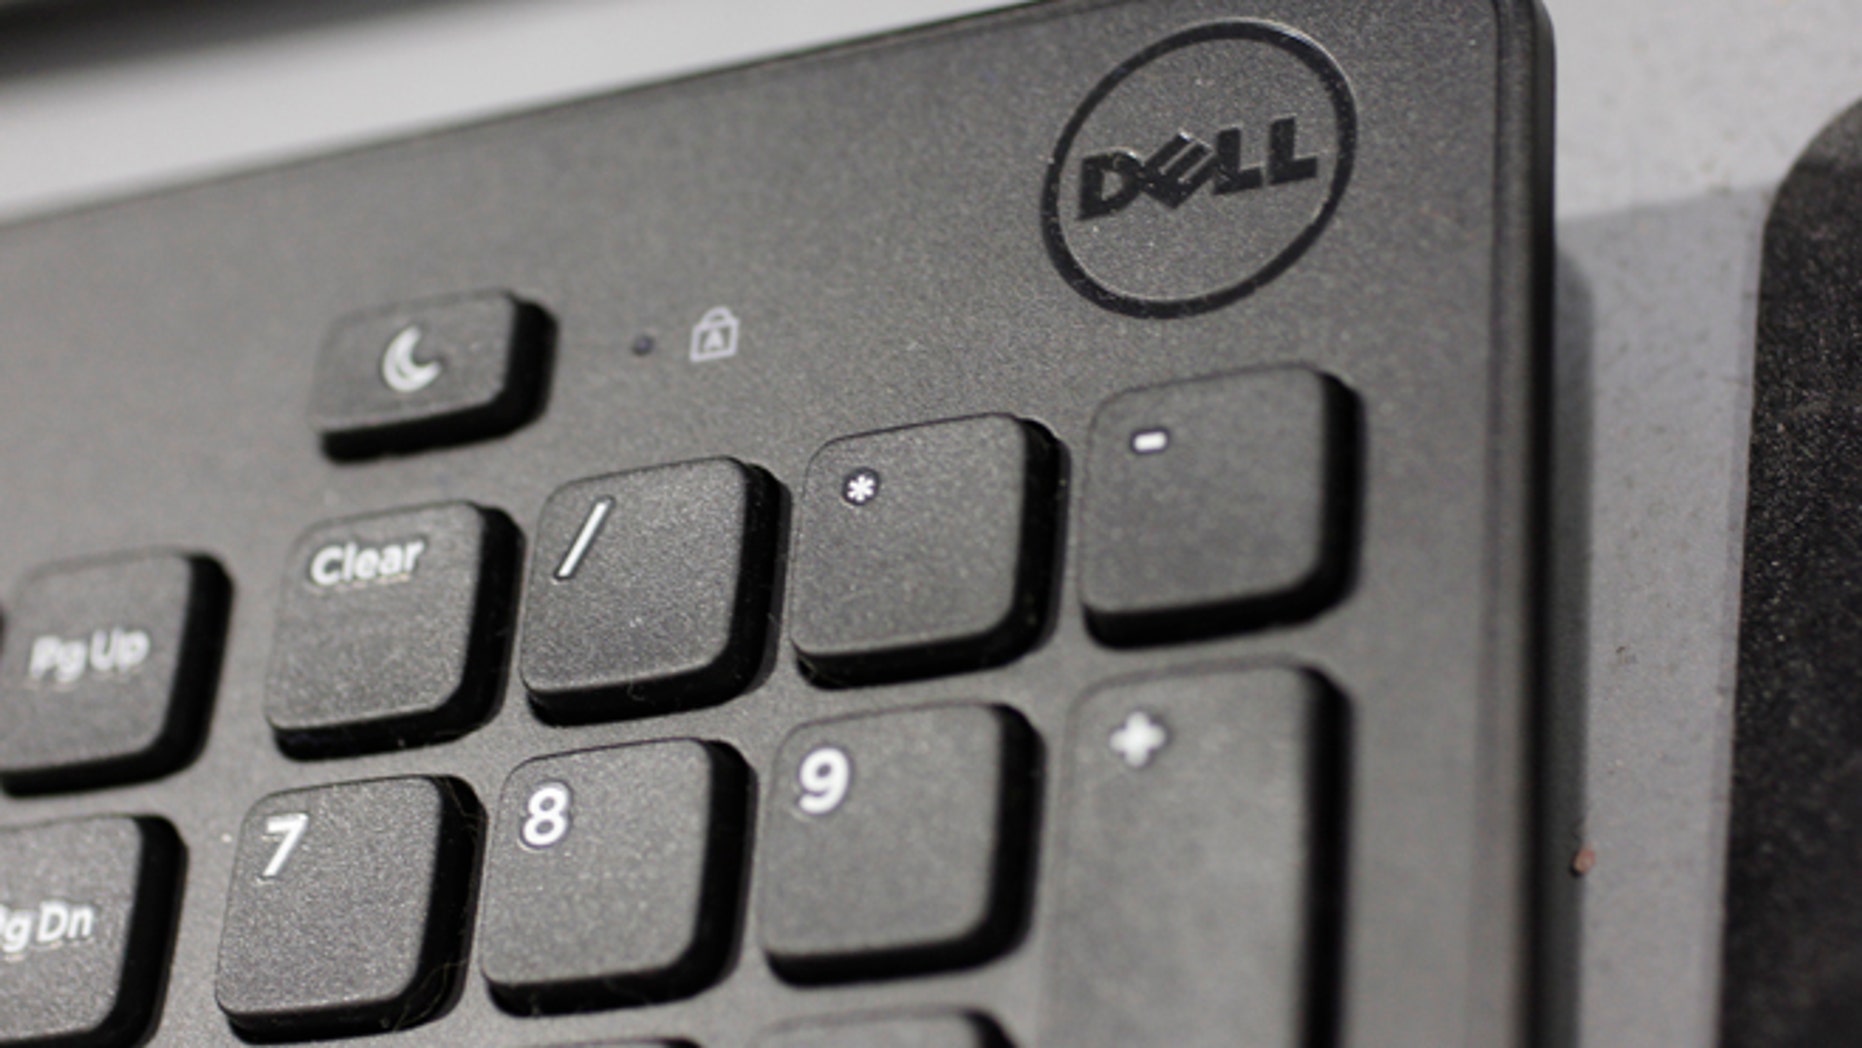 Dell in $24.4B deal to go private | Fox News